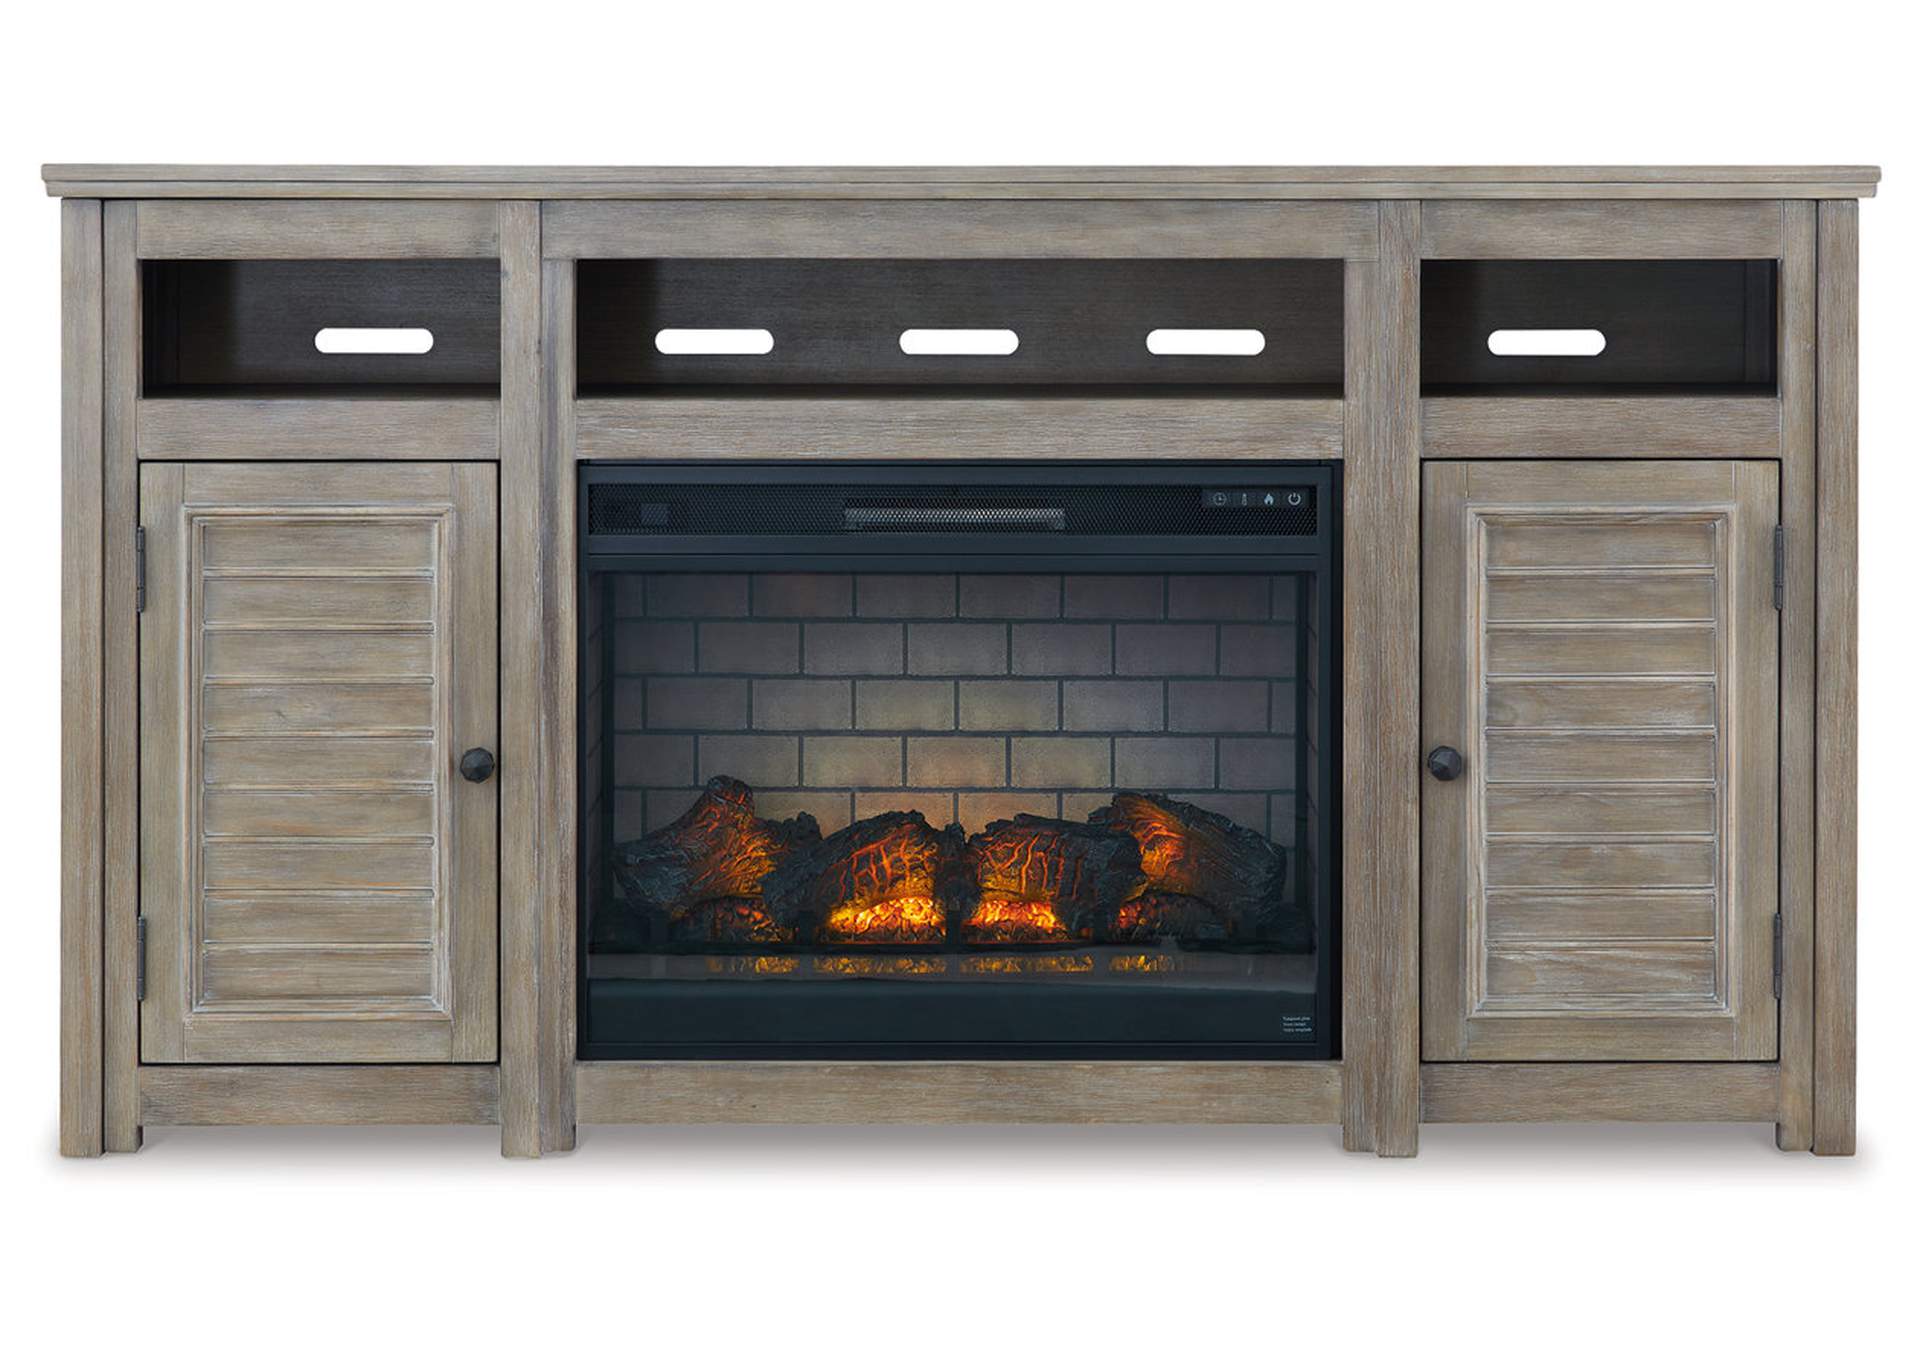 Moreshire 72" TV Stand with Electric Fireplace,Signature Design By Ashley